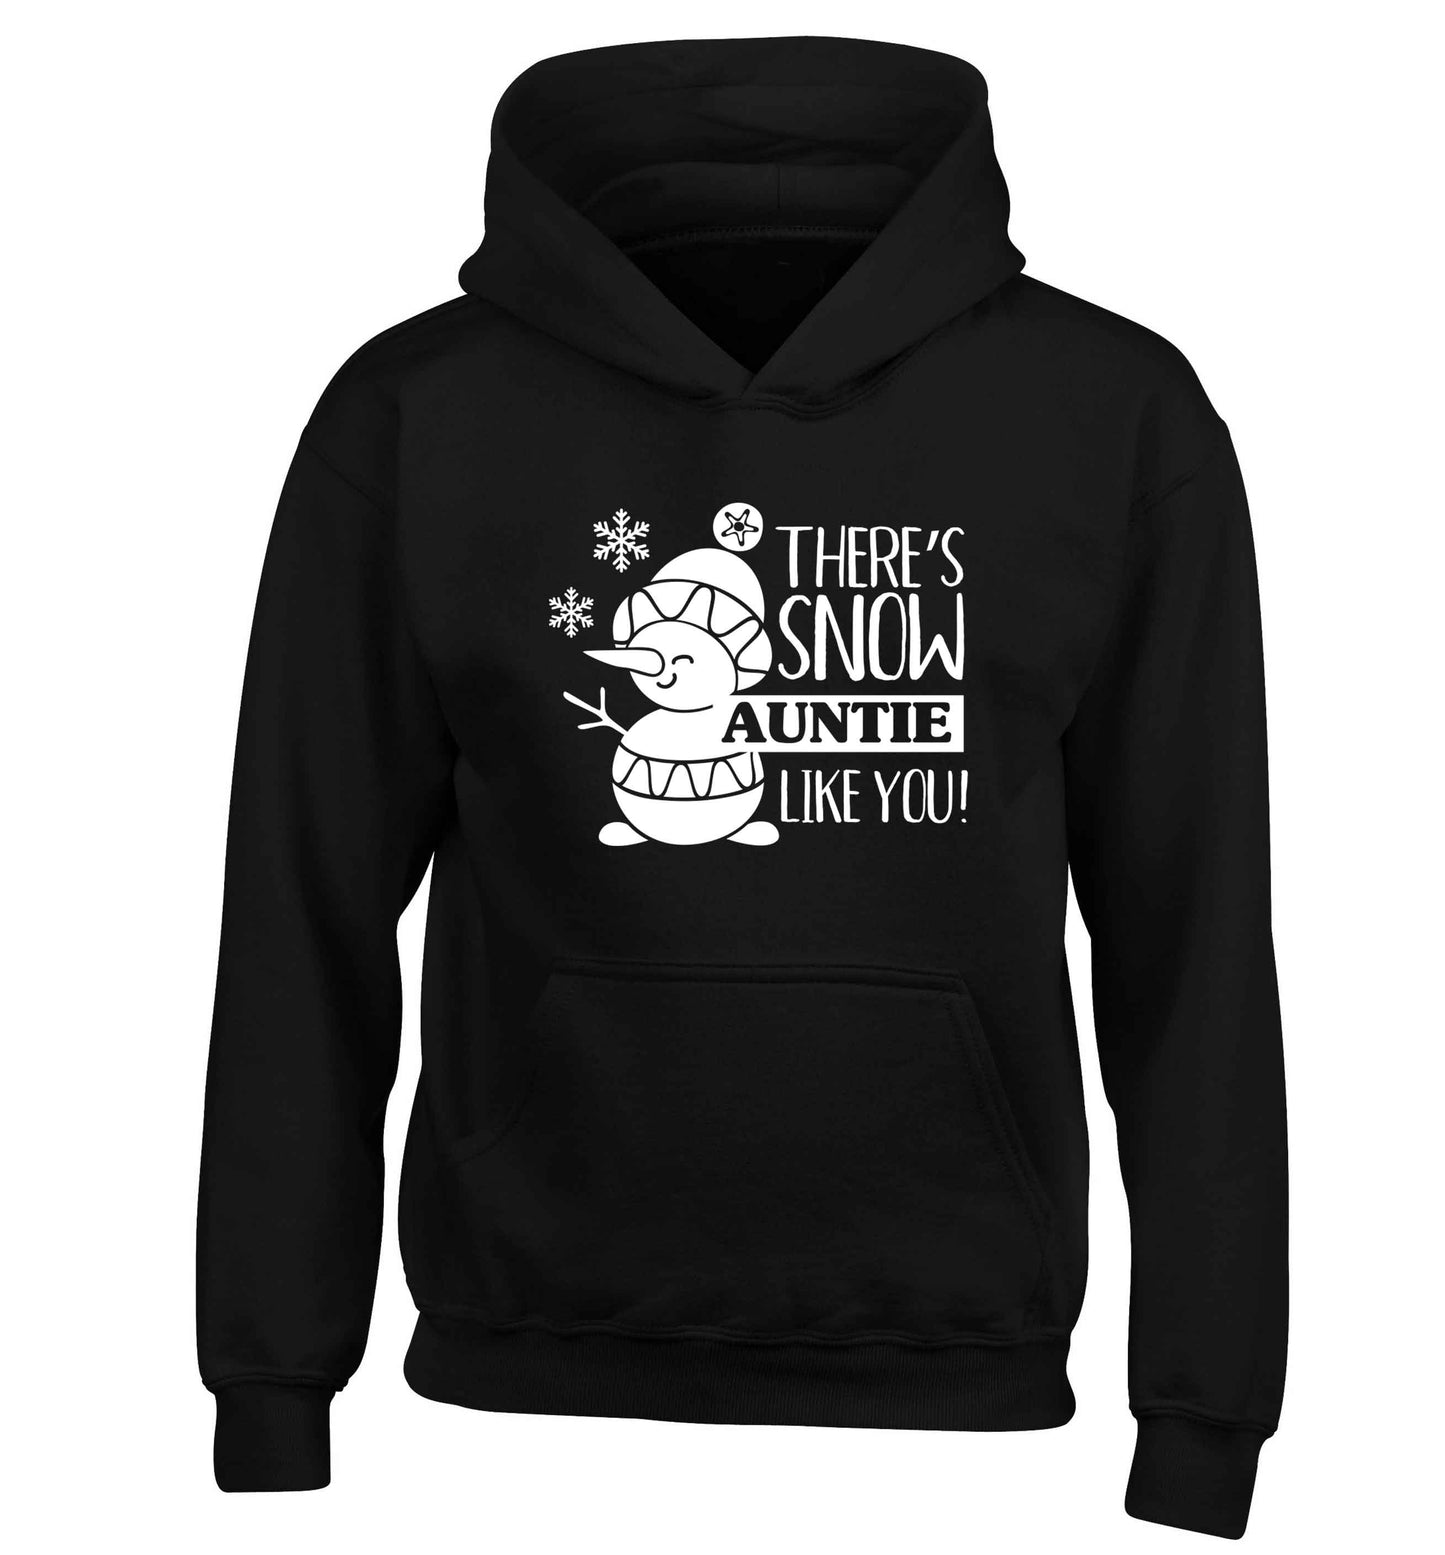 There's snow auntie like you children's black hoodie 12-13 Years